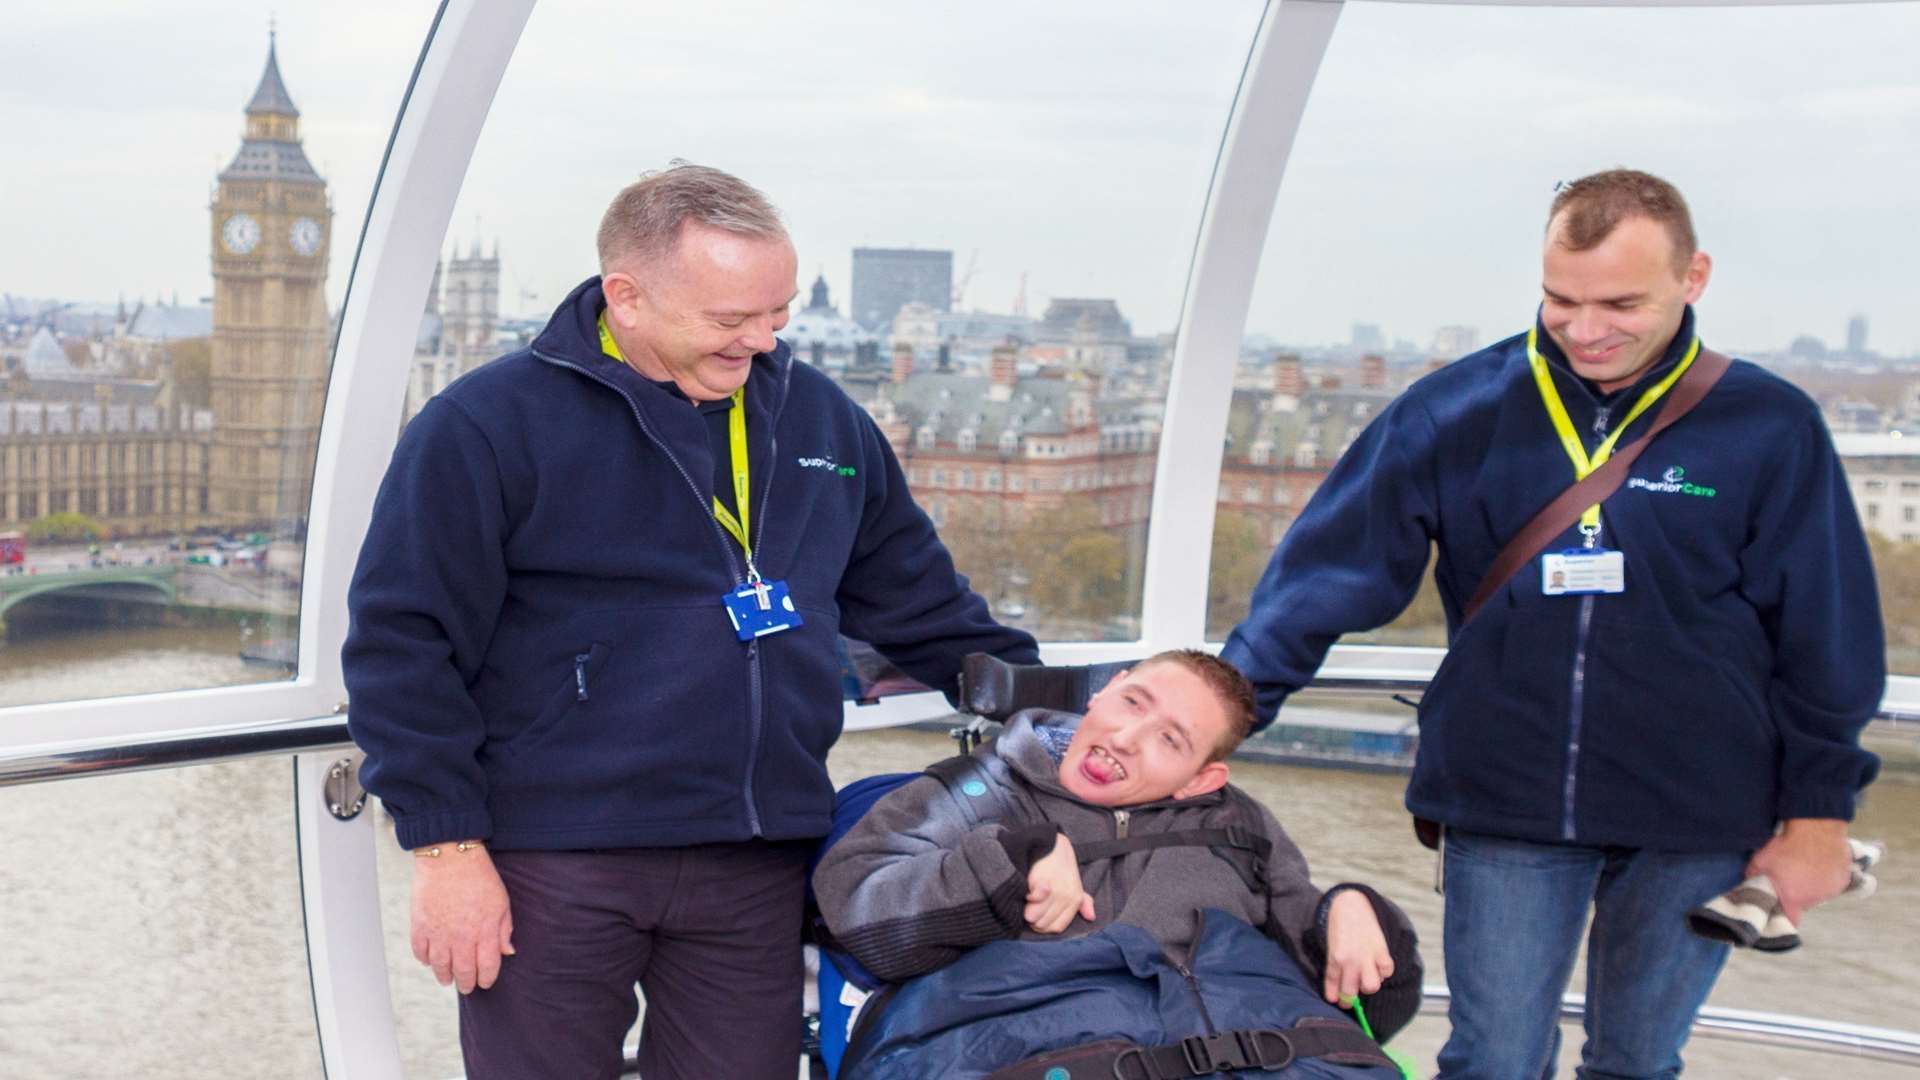 Superior Care carers Iain, left, and Stefan taking long-term client Luke out for a day trip in London